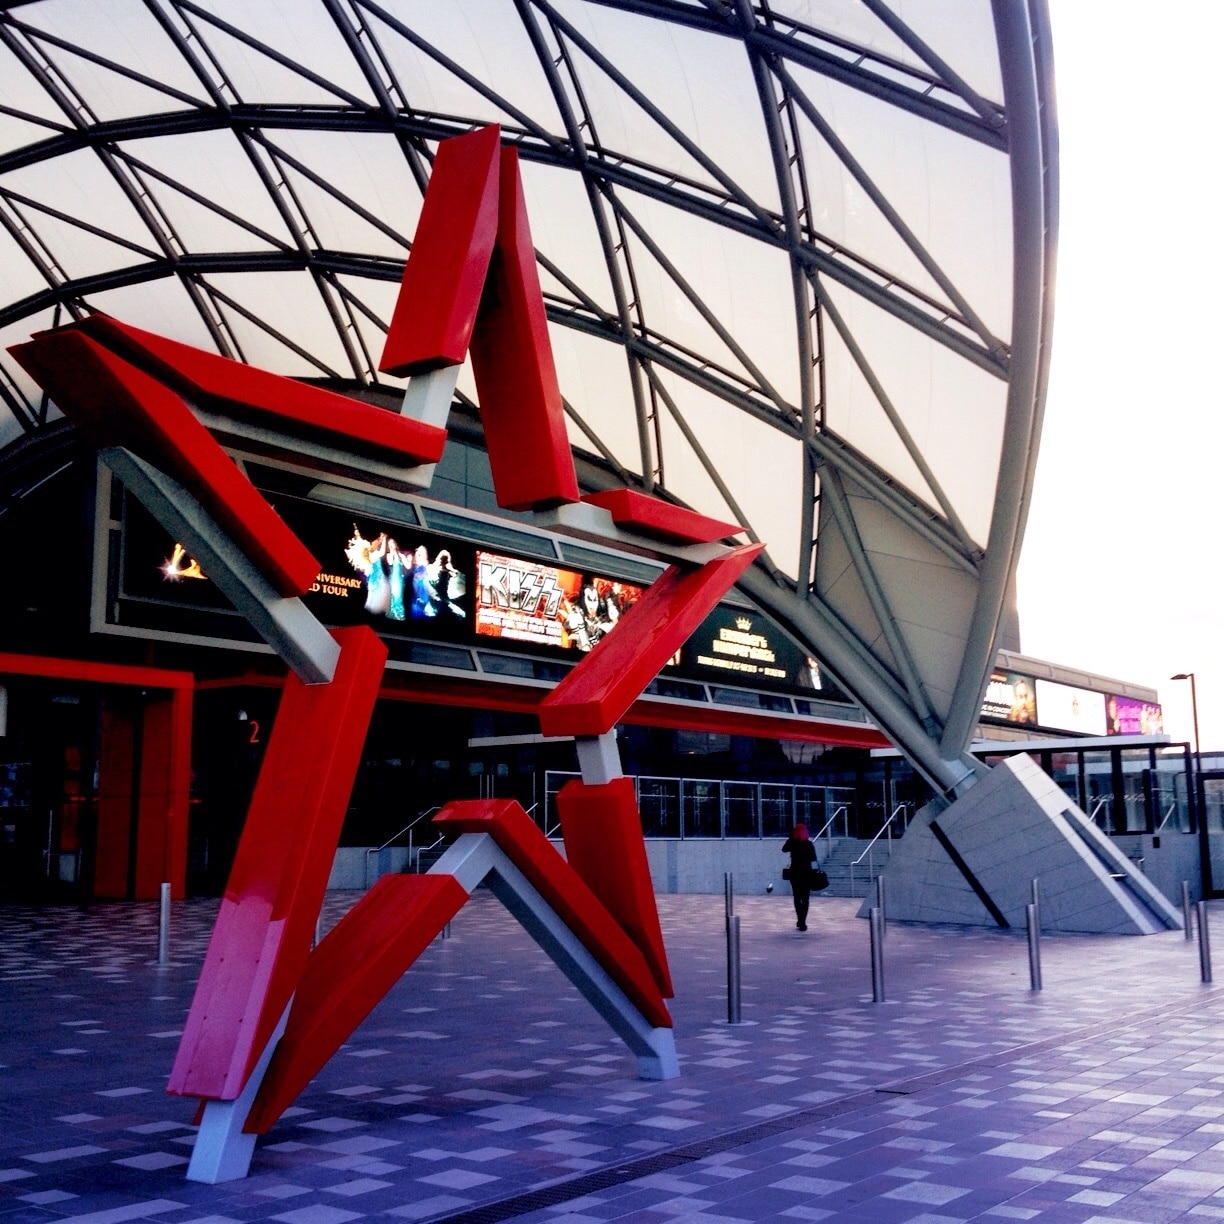 Adelaide Entertainment Centre, South Australia. 
Where concerts and events are held